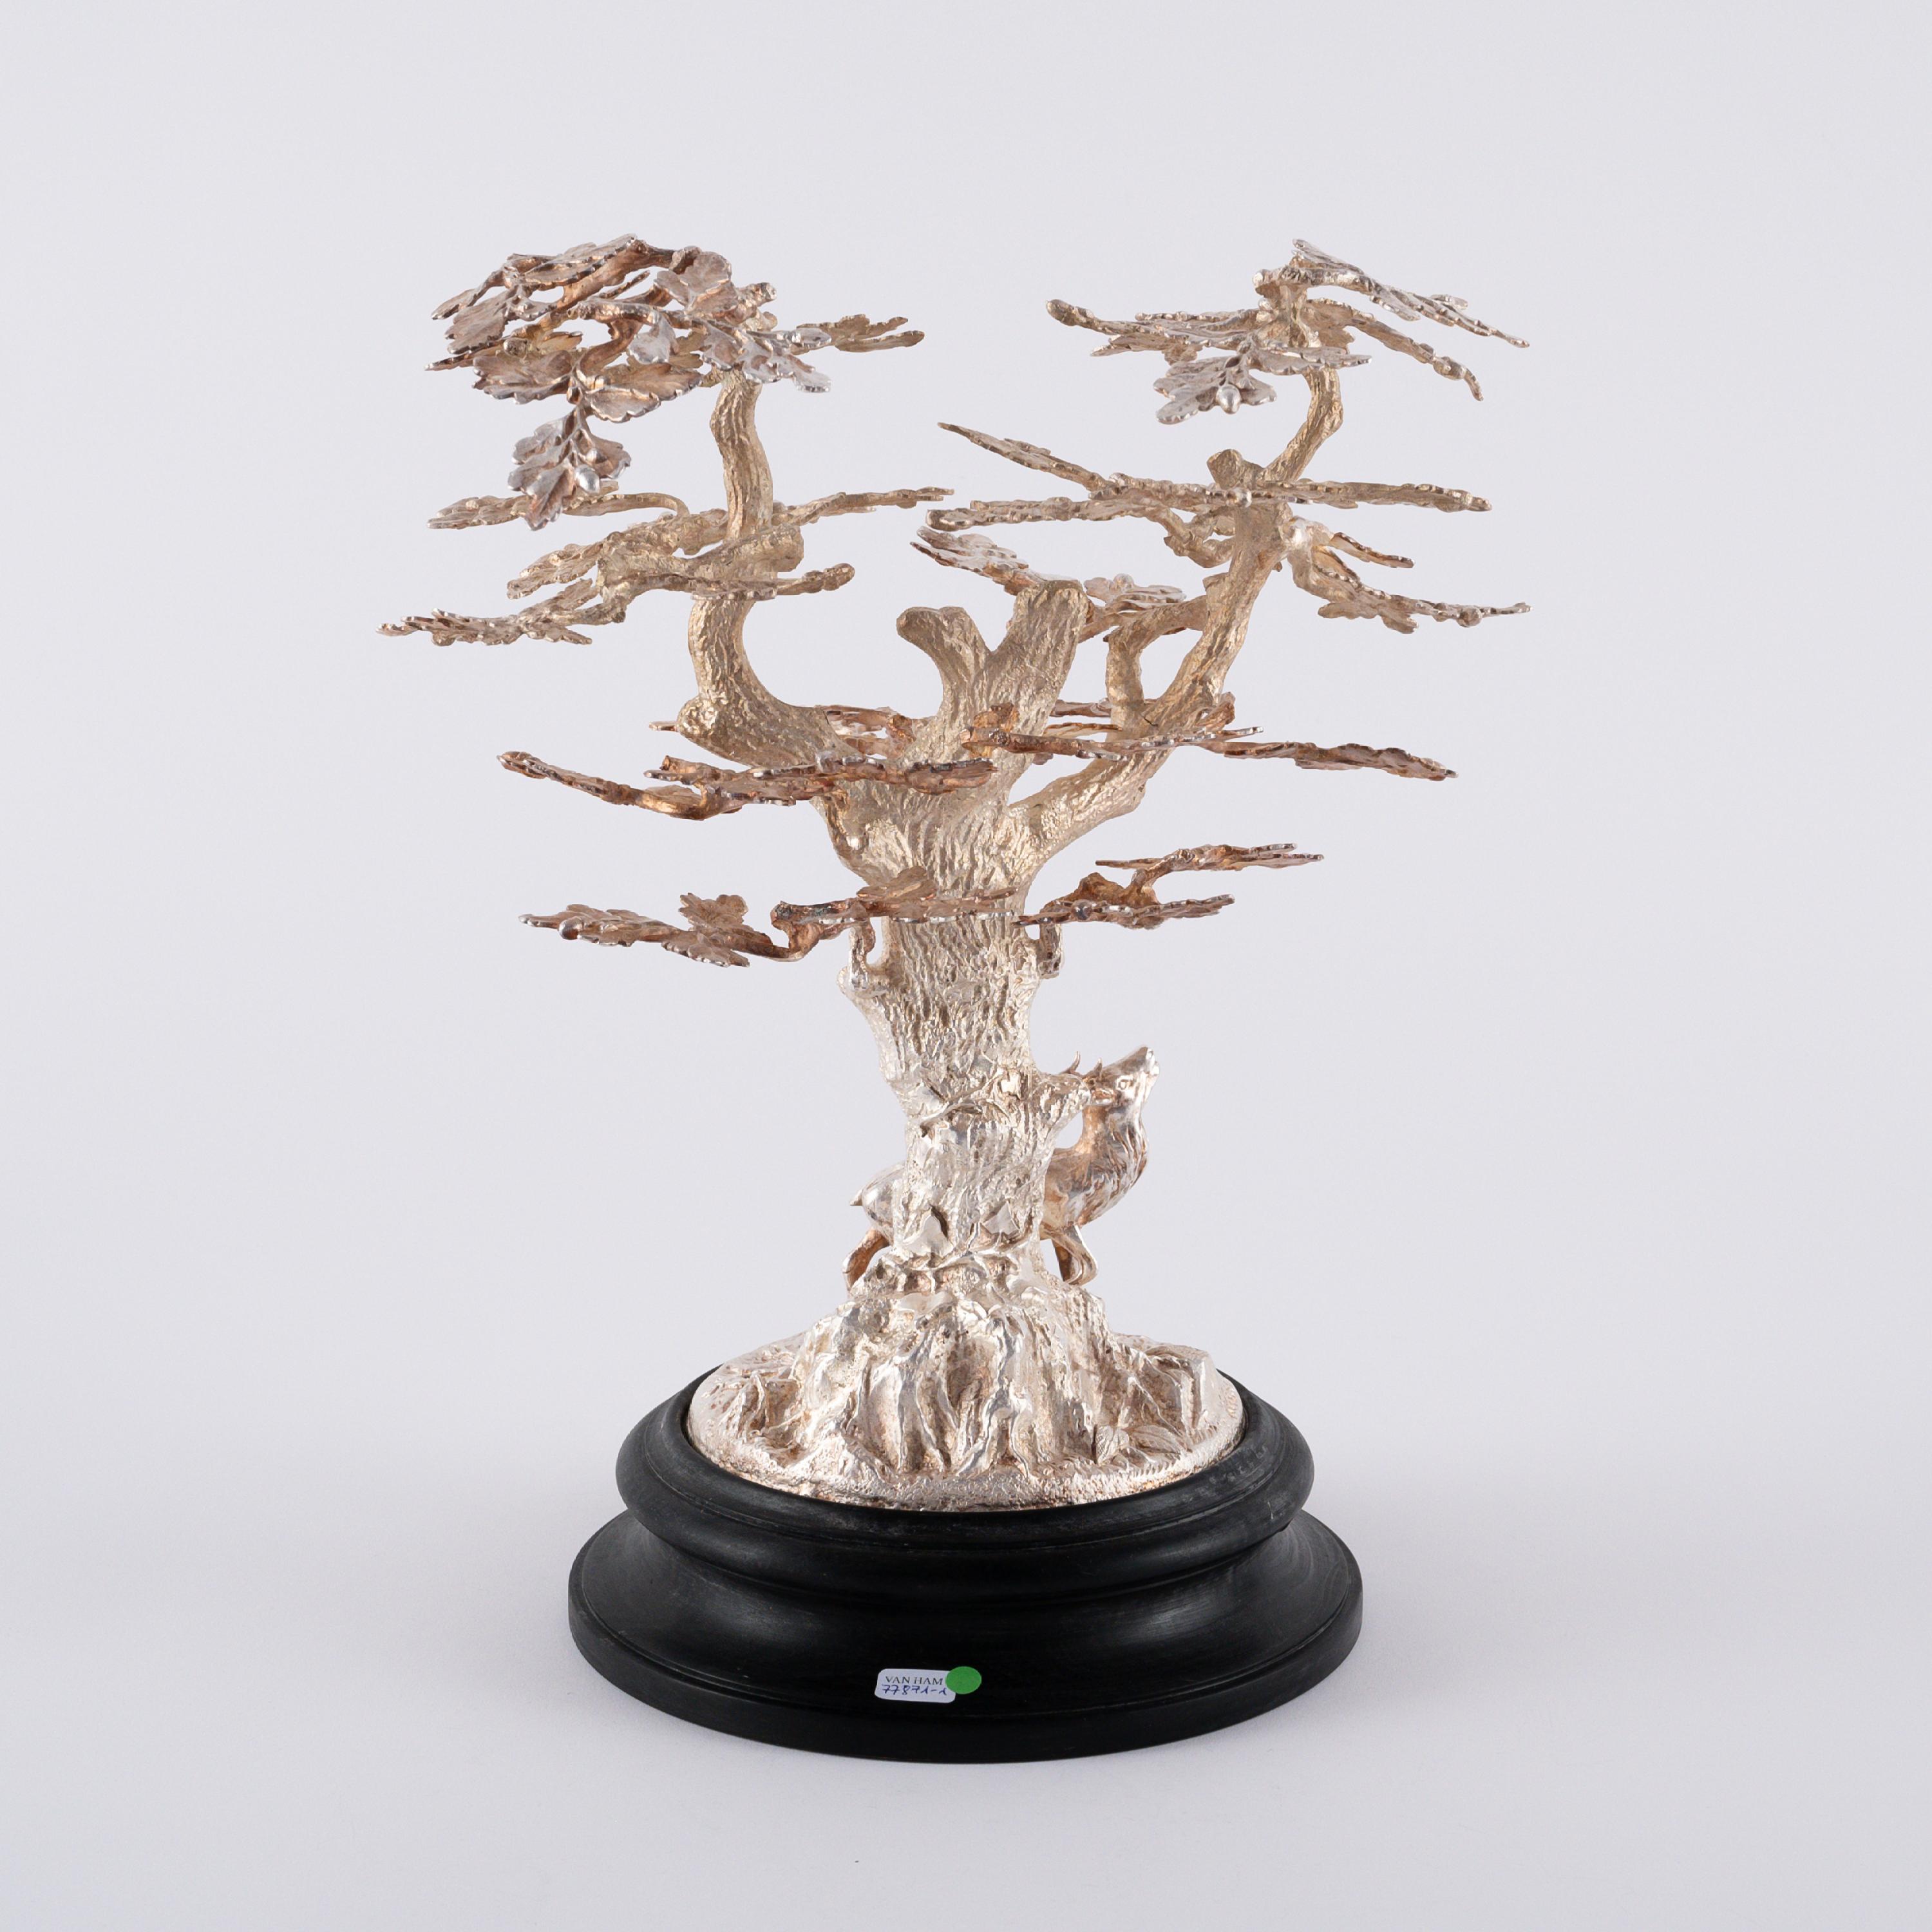 EXTRAORDINARY SILVER HUNTING CENTRE PIECE WITH STAG UNDER A LARGE OAK TREE - Image 4 of 5